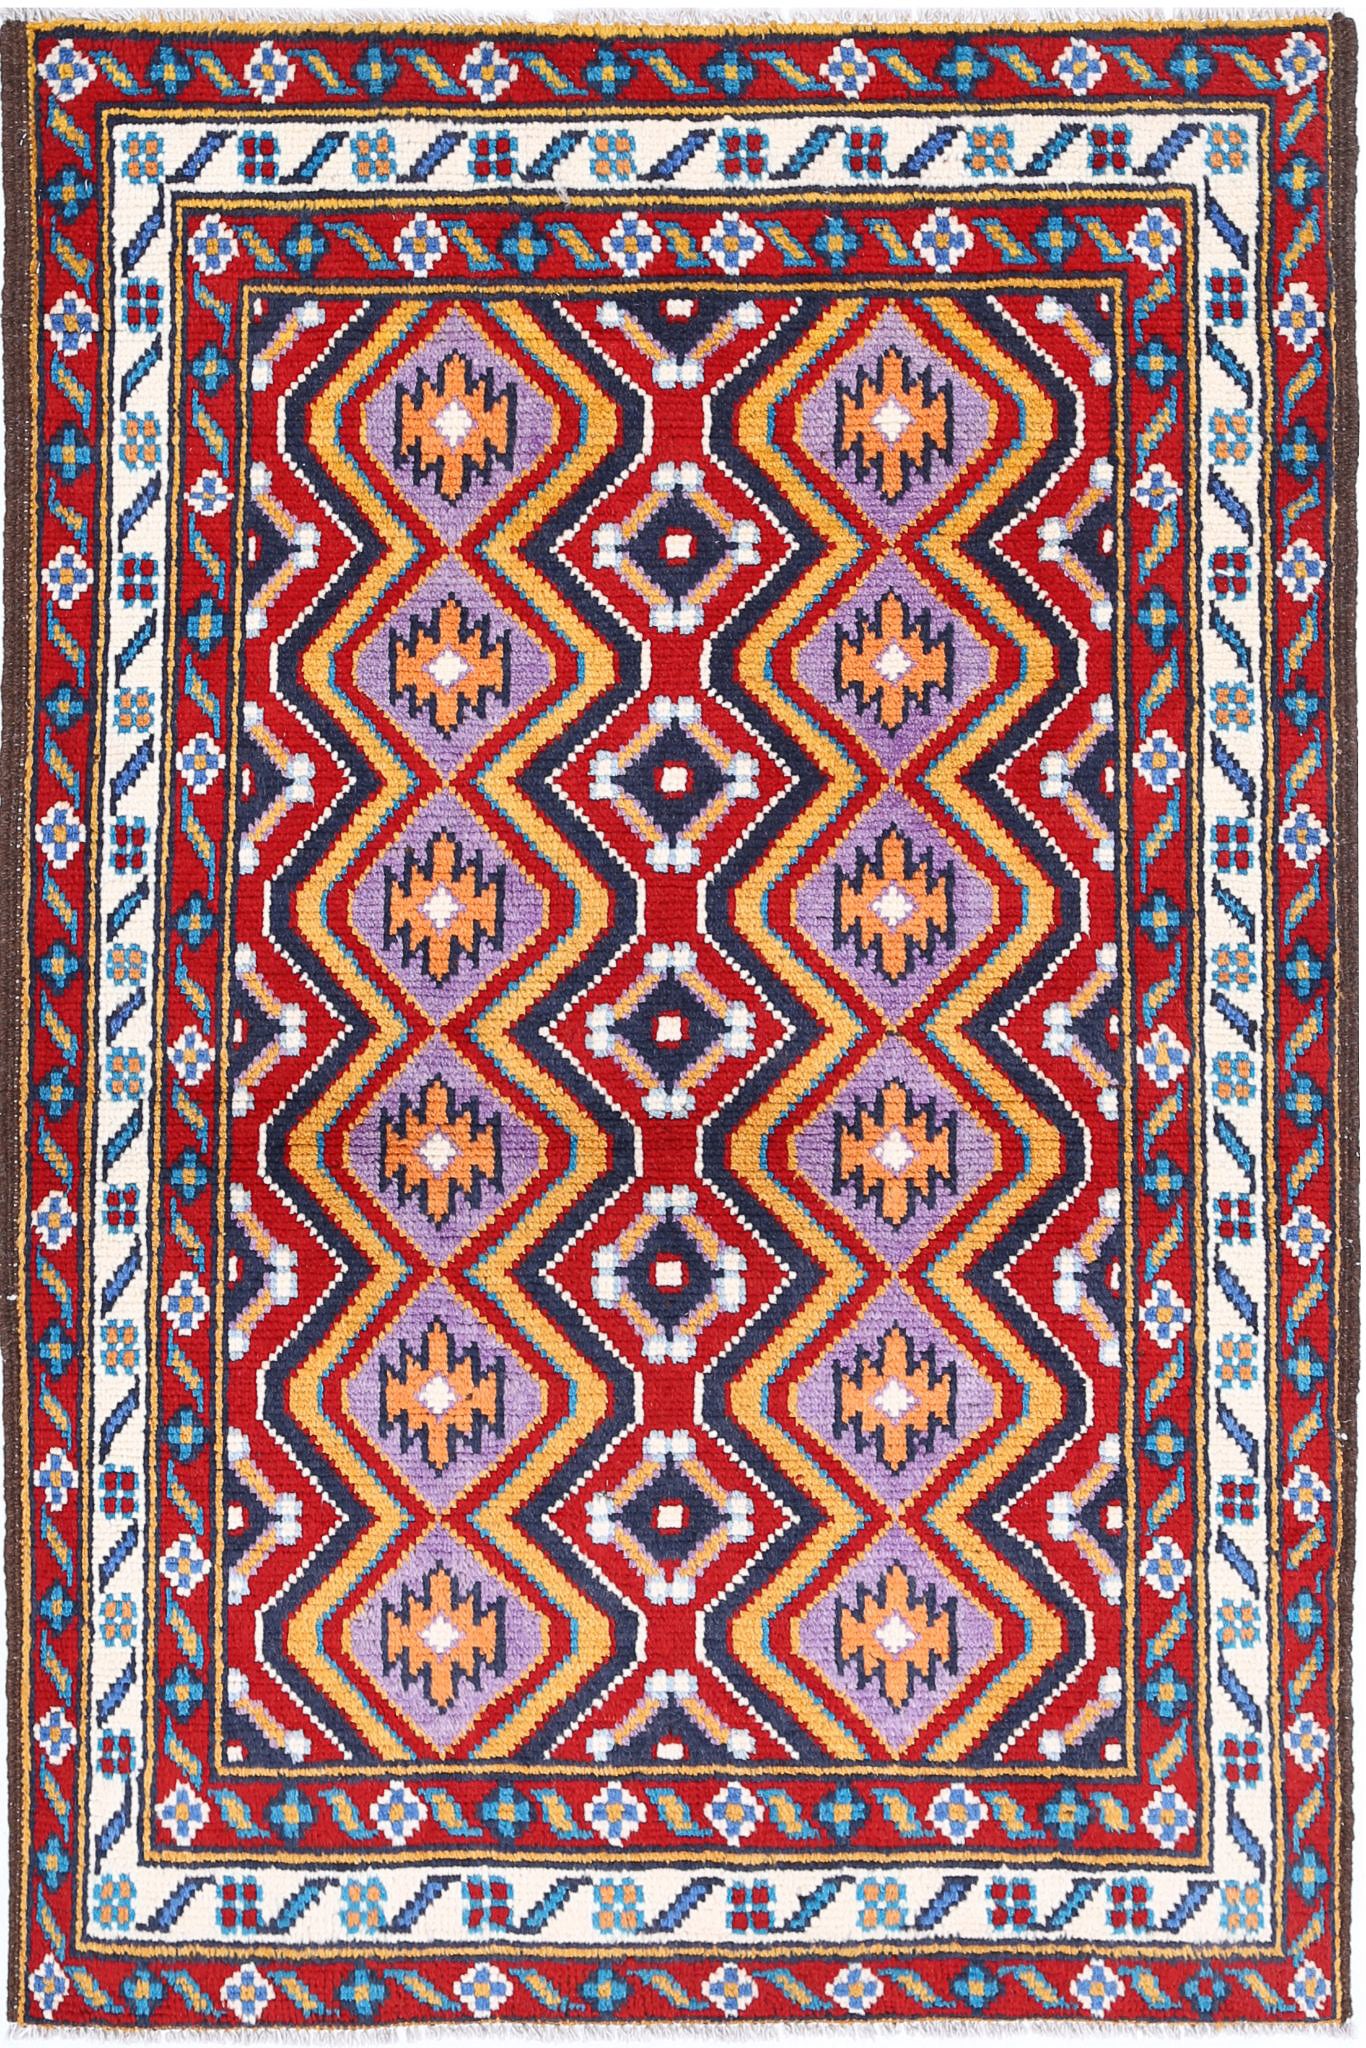 Revival-hand-knotted-qarghani-wool-rug-5014044.jpg